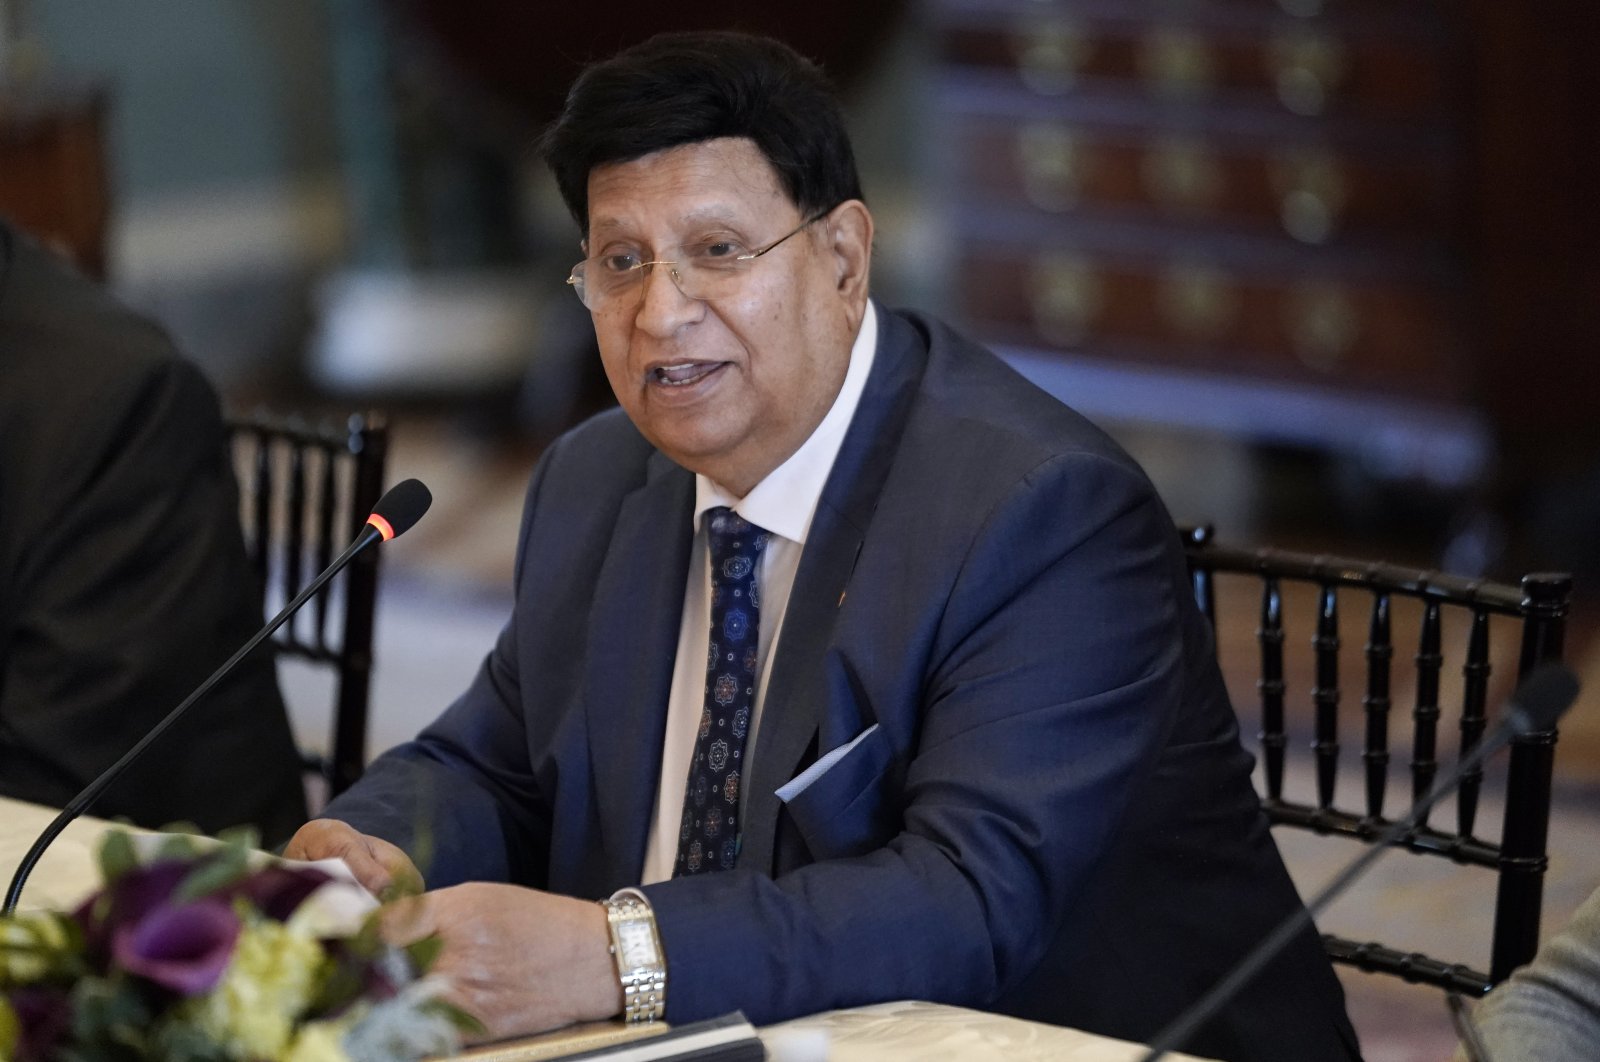 Bangladesh's Foreign Minister AK Abdul Momen speaks during a meeting with Secretary of State Antony Blinken, not pictured, at the State Department in Washington, Monday, April 10, 2023. (Elizabeth Frantz/Pool Photo via AP)